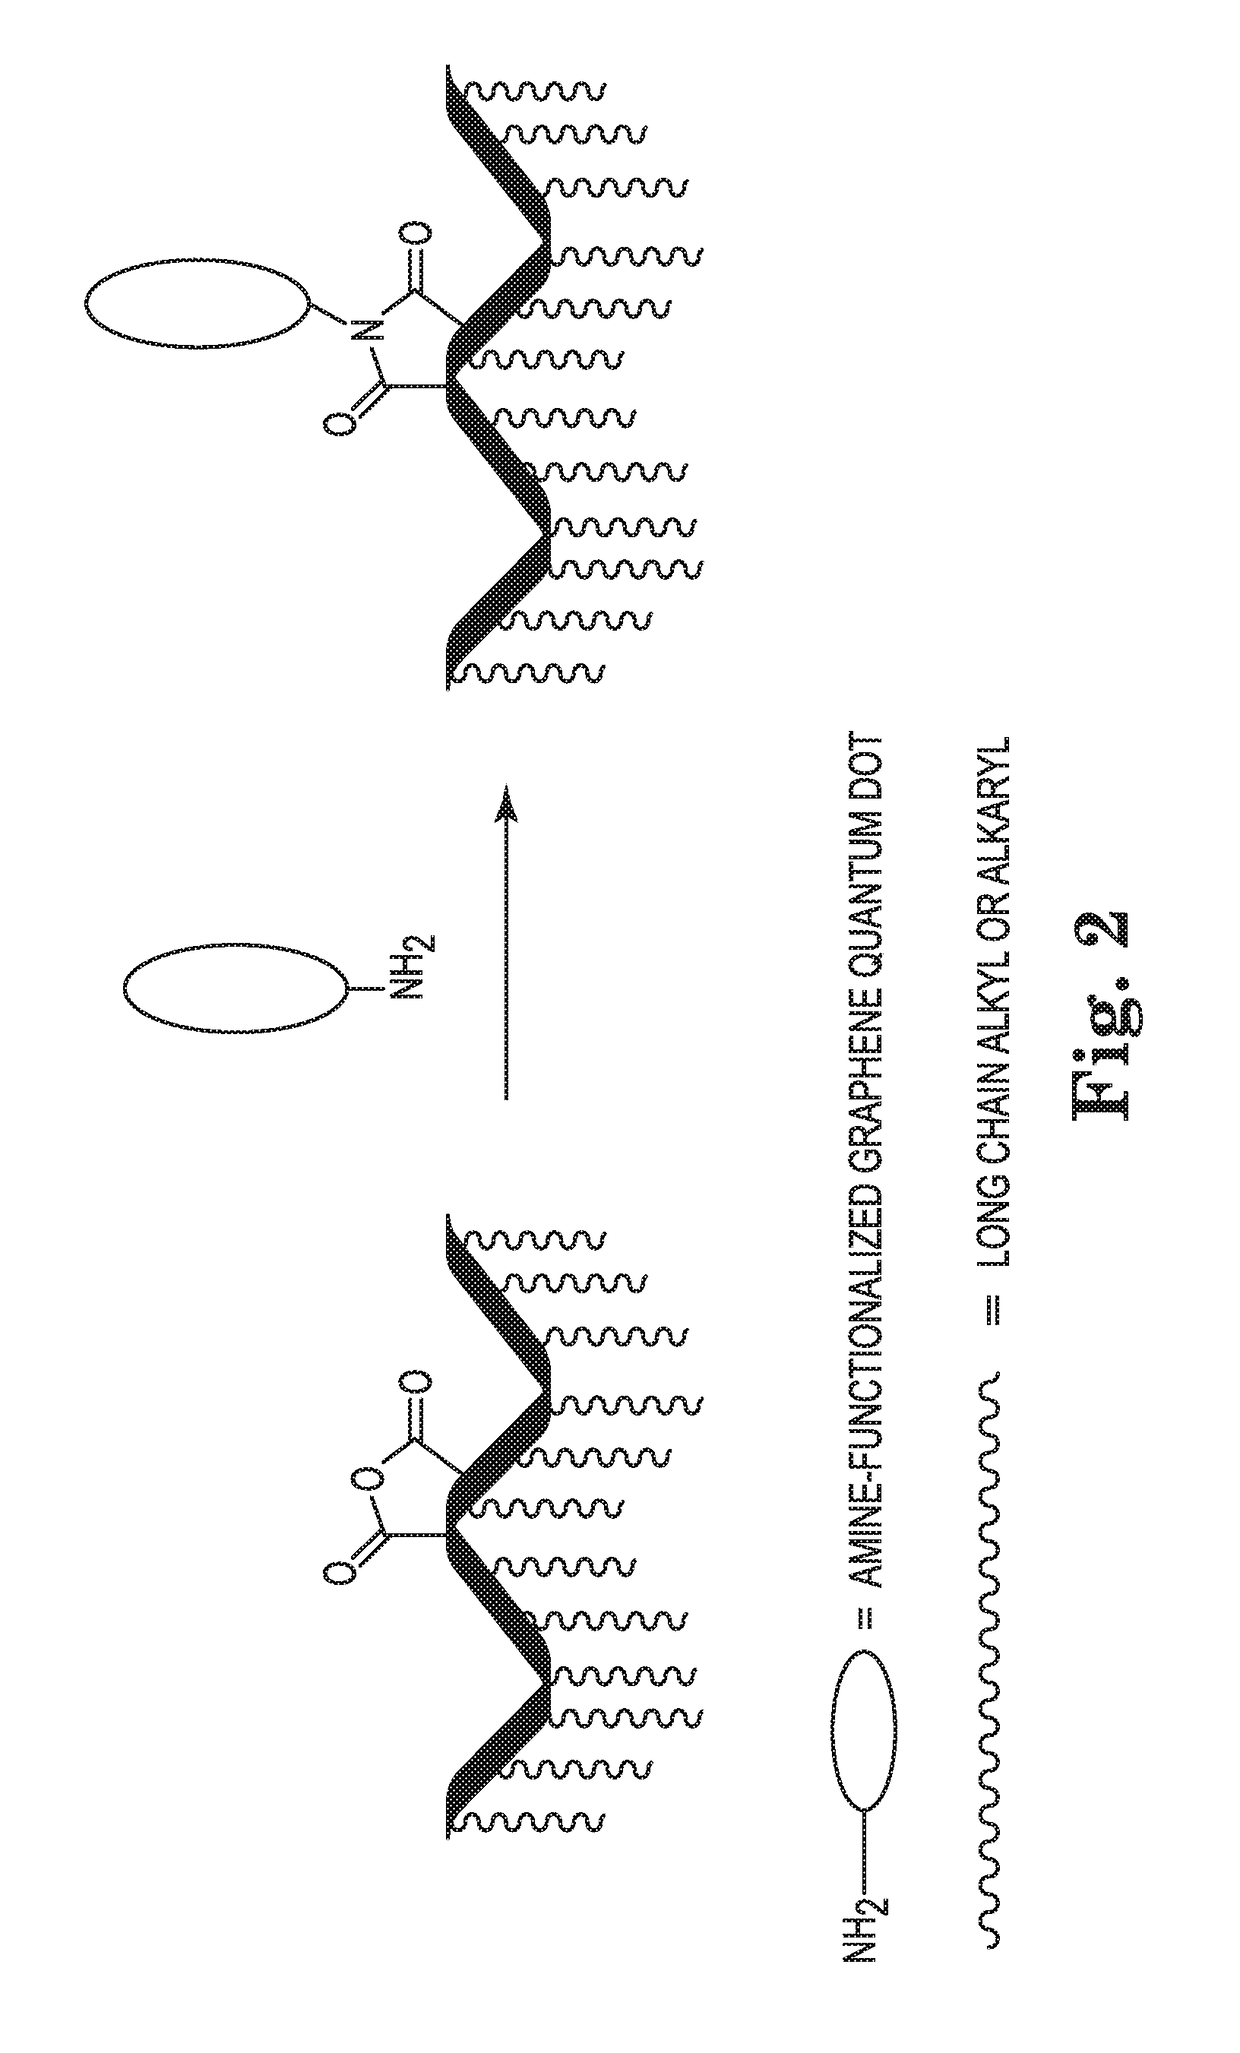 Paraffin suppressant compositions, and methods of making and using